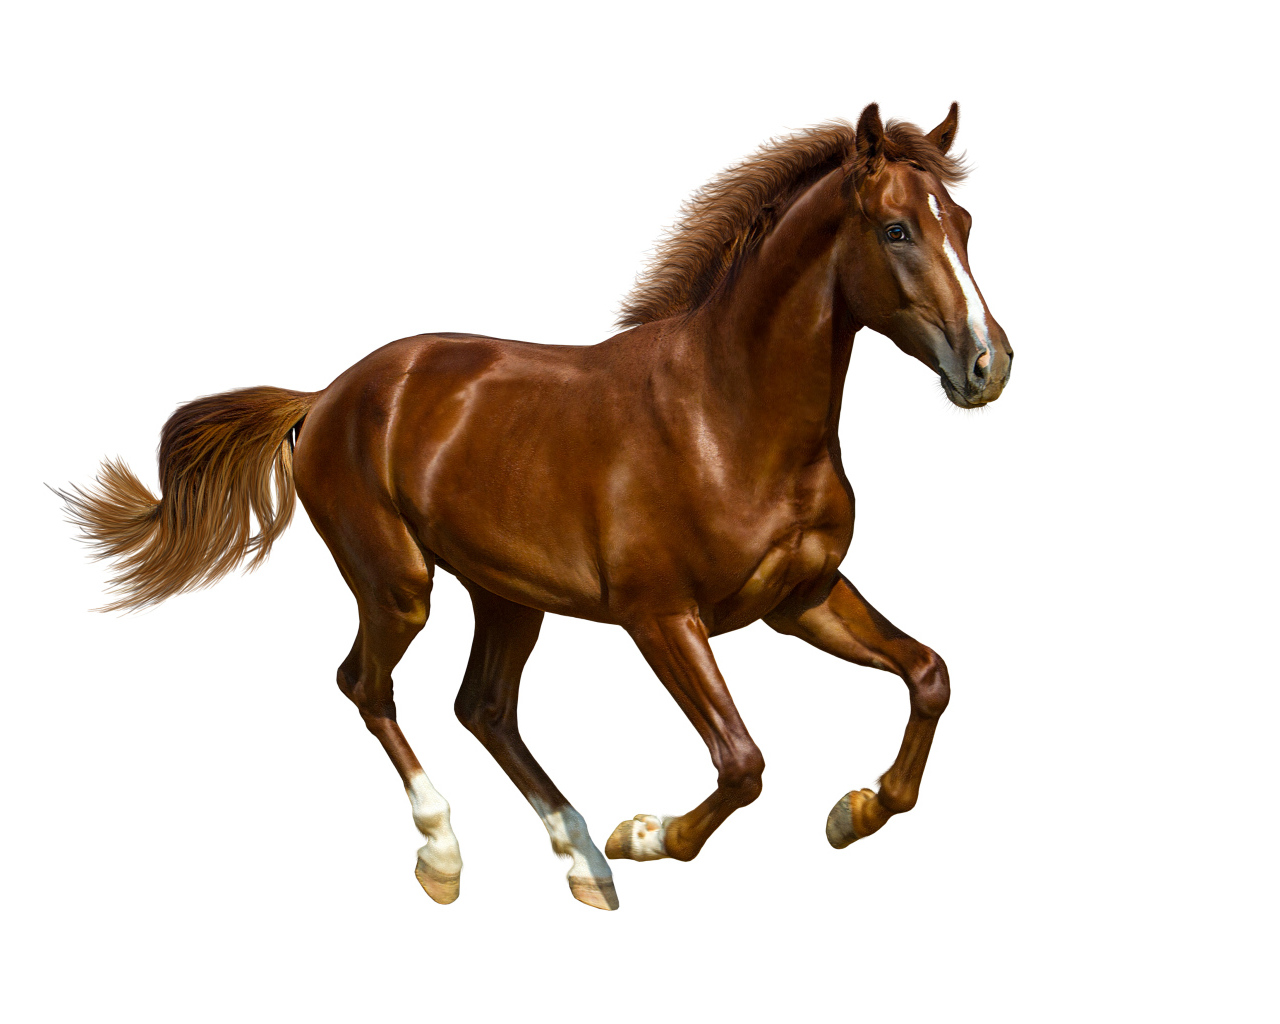 Brown handsome horse on white background